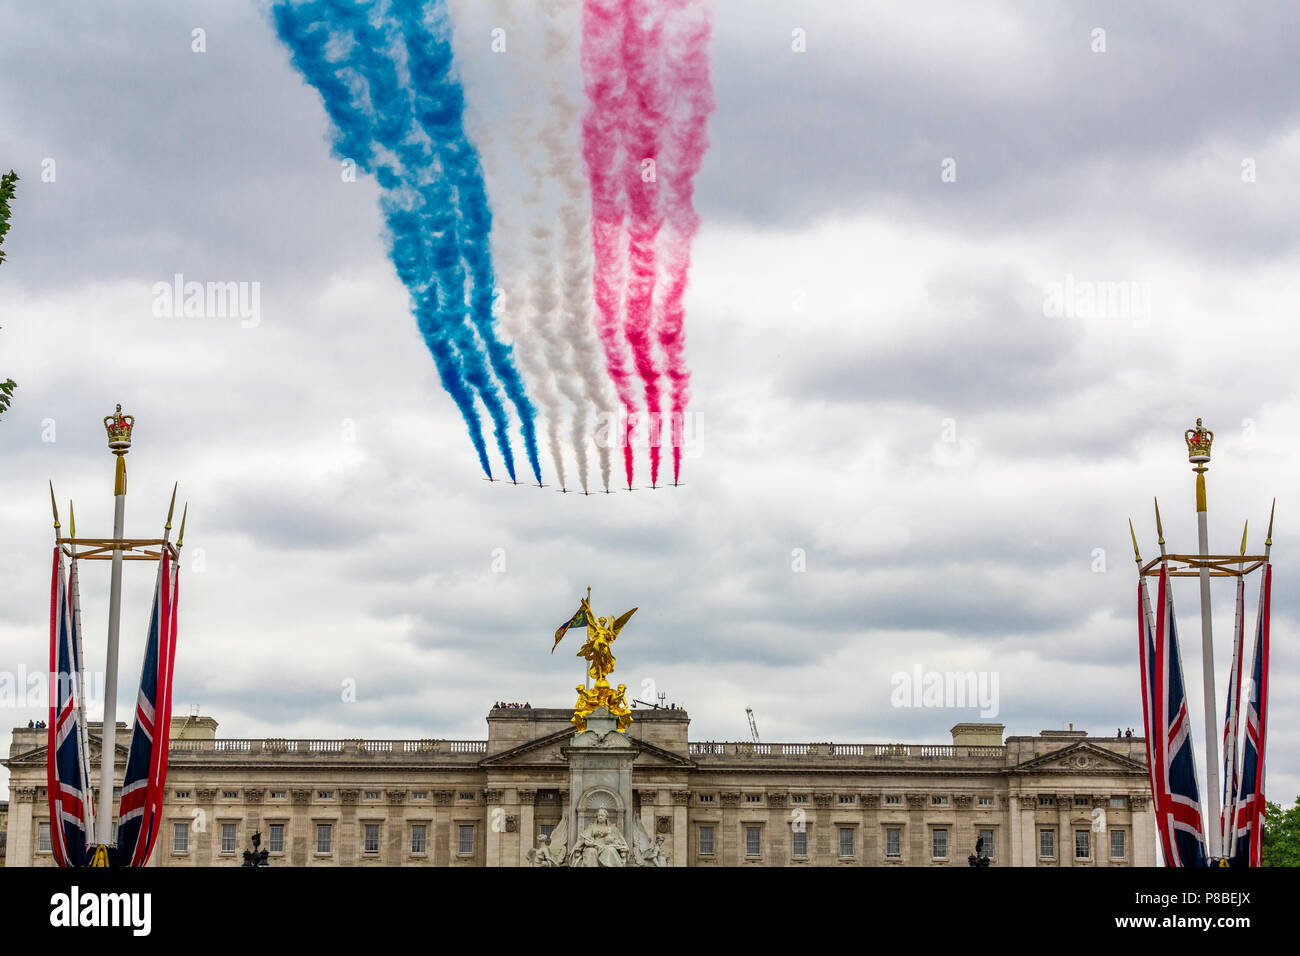 The RAF100 flypast and centenary celebrations with 100 aircraft participating in 100th Birthday of the RAF Buckingham Palace London UK Stock Photo